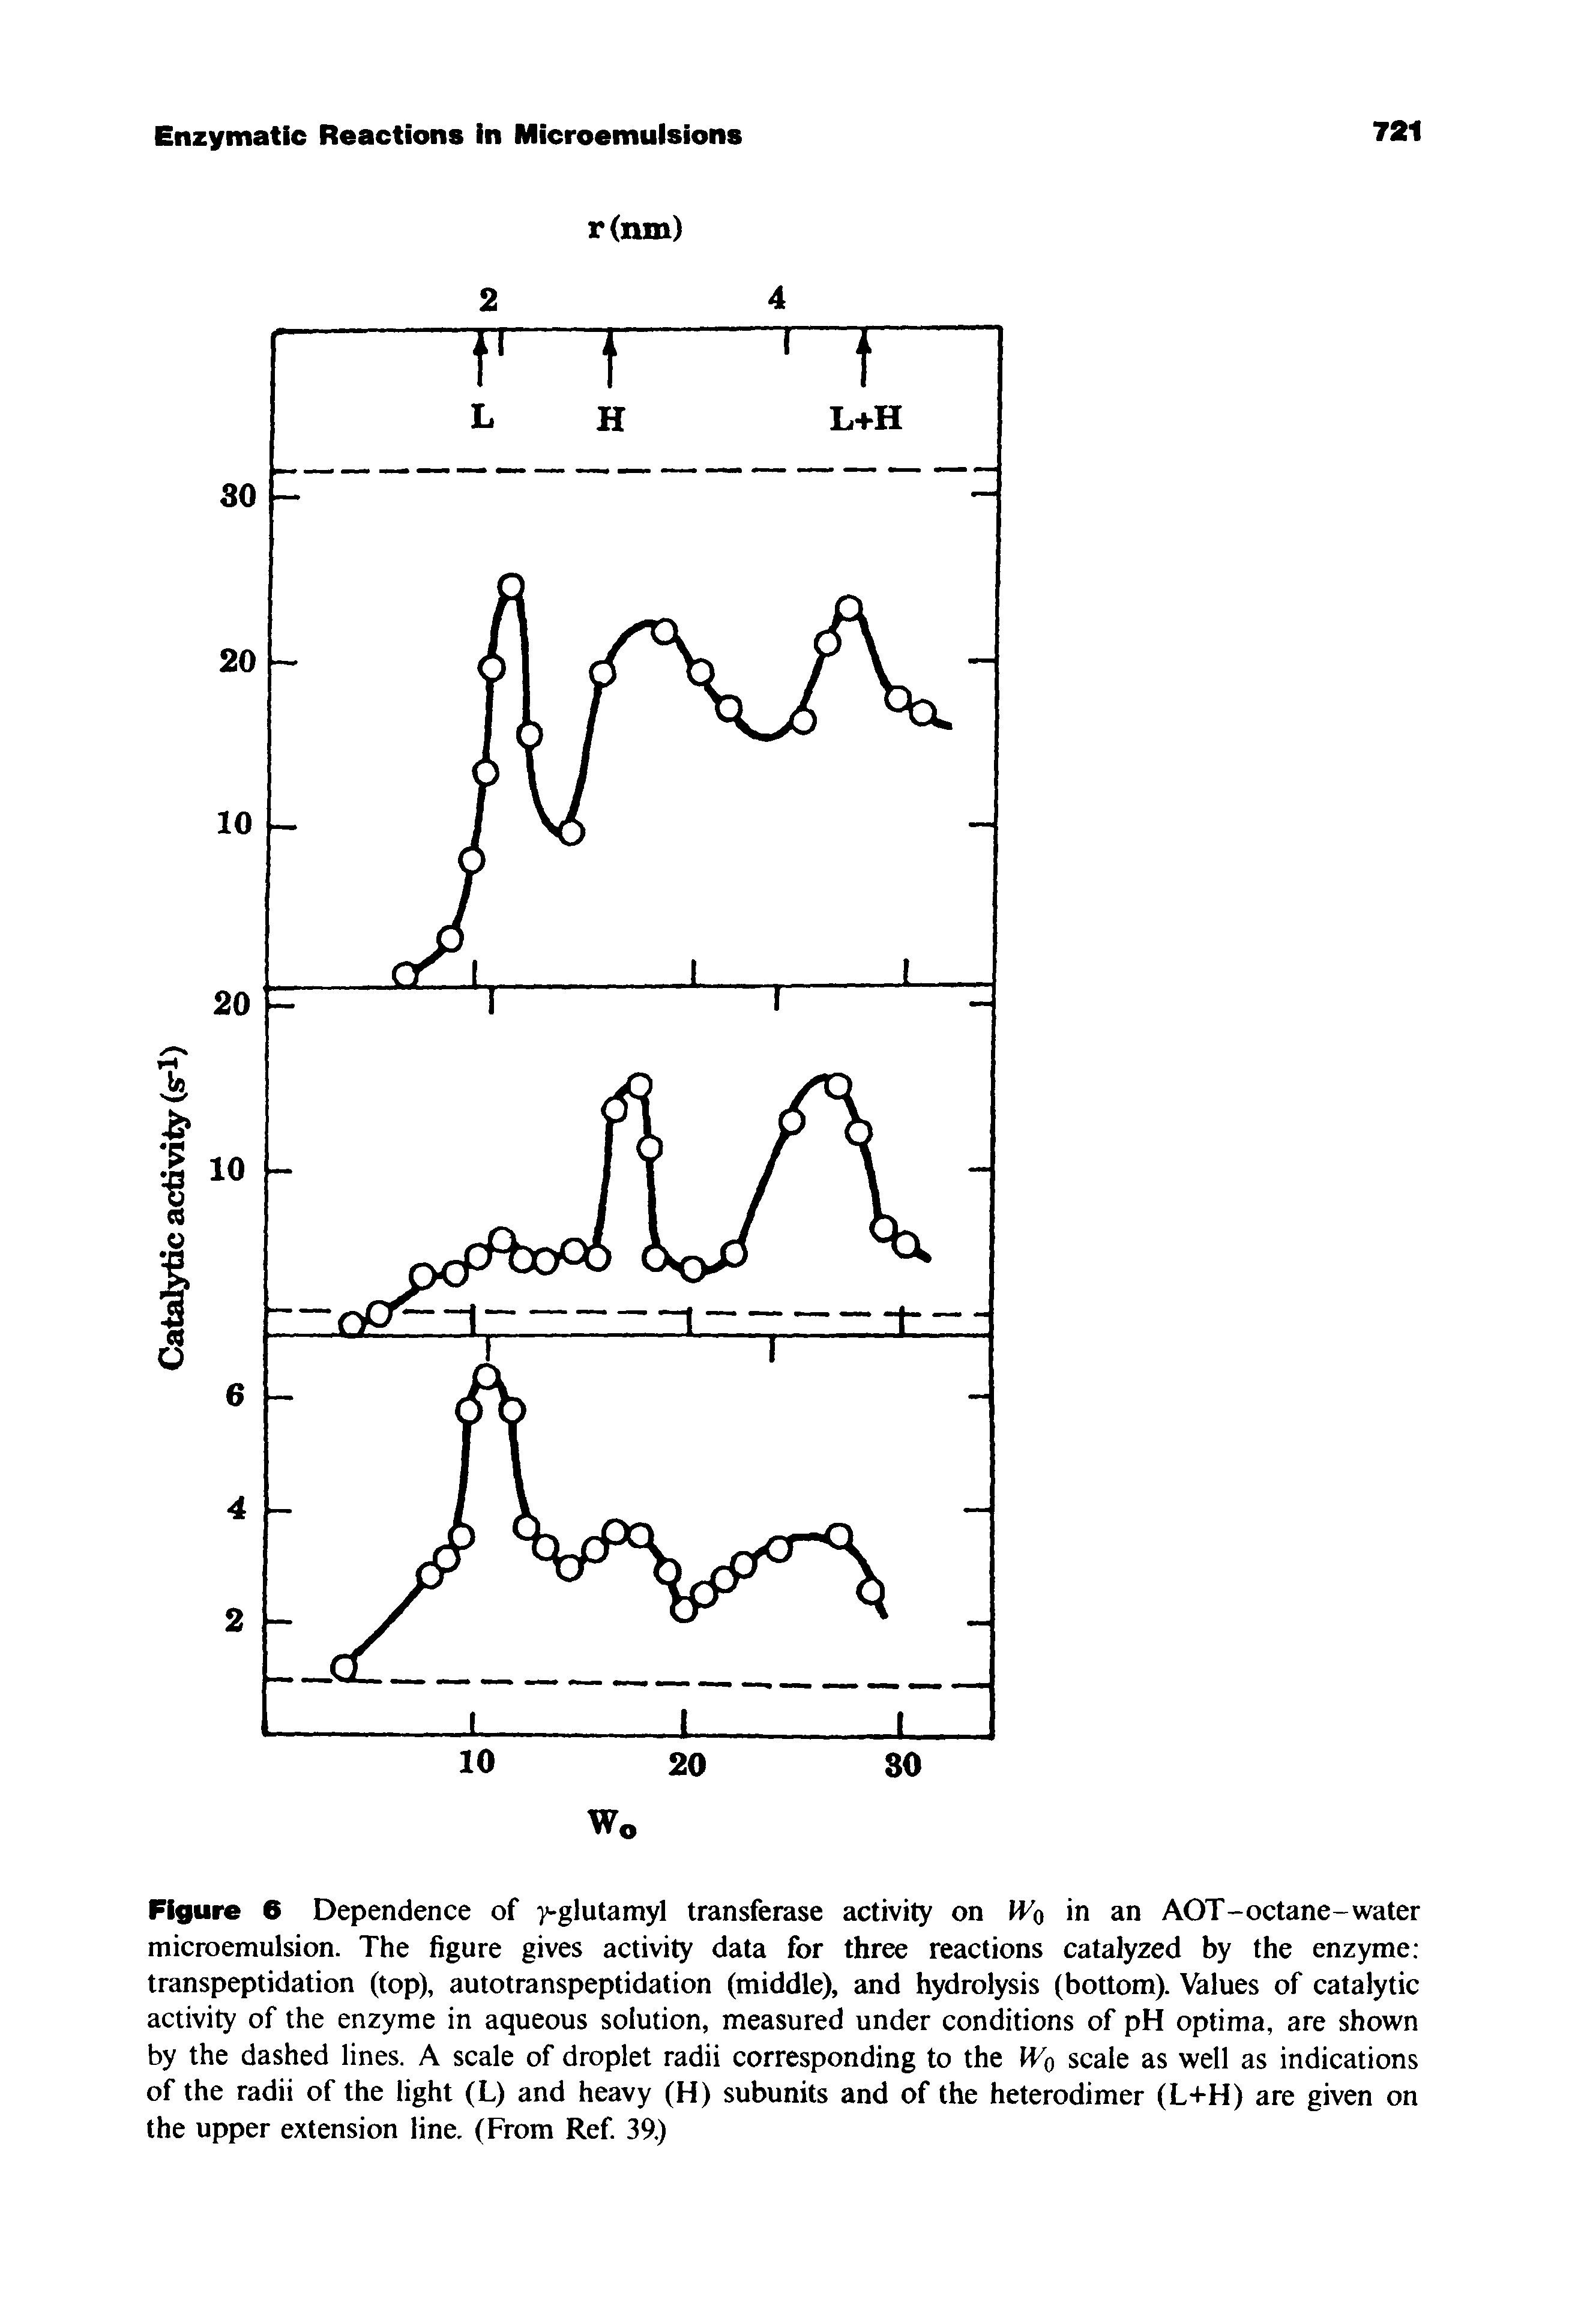 Figure 6 Dependence of y-glutamyl transferase activity on IVq in an AOT-octane-water microemulsion. The figure gives activity data for three reactions catalyzed by the enzyme transpeptidation (top), autotranspeptidation (middle), and hydrolysis (bottom). Values of catalytic activity of the enzyme in aqueous solution, measured under conditions of pH optima, are shown by the dashed lines. A scale of droplet radii corresponding to the Wq scale as well as indications of the radii of the light (L) and heavy (H) subunits and of the heterodimer (L+H) are given on the upper extension line. (From Ref 39.)...